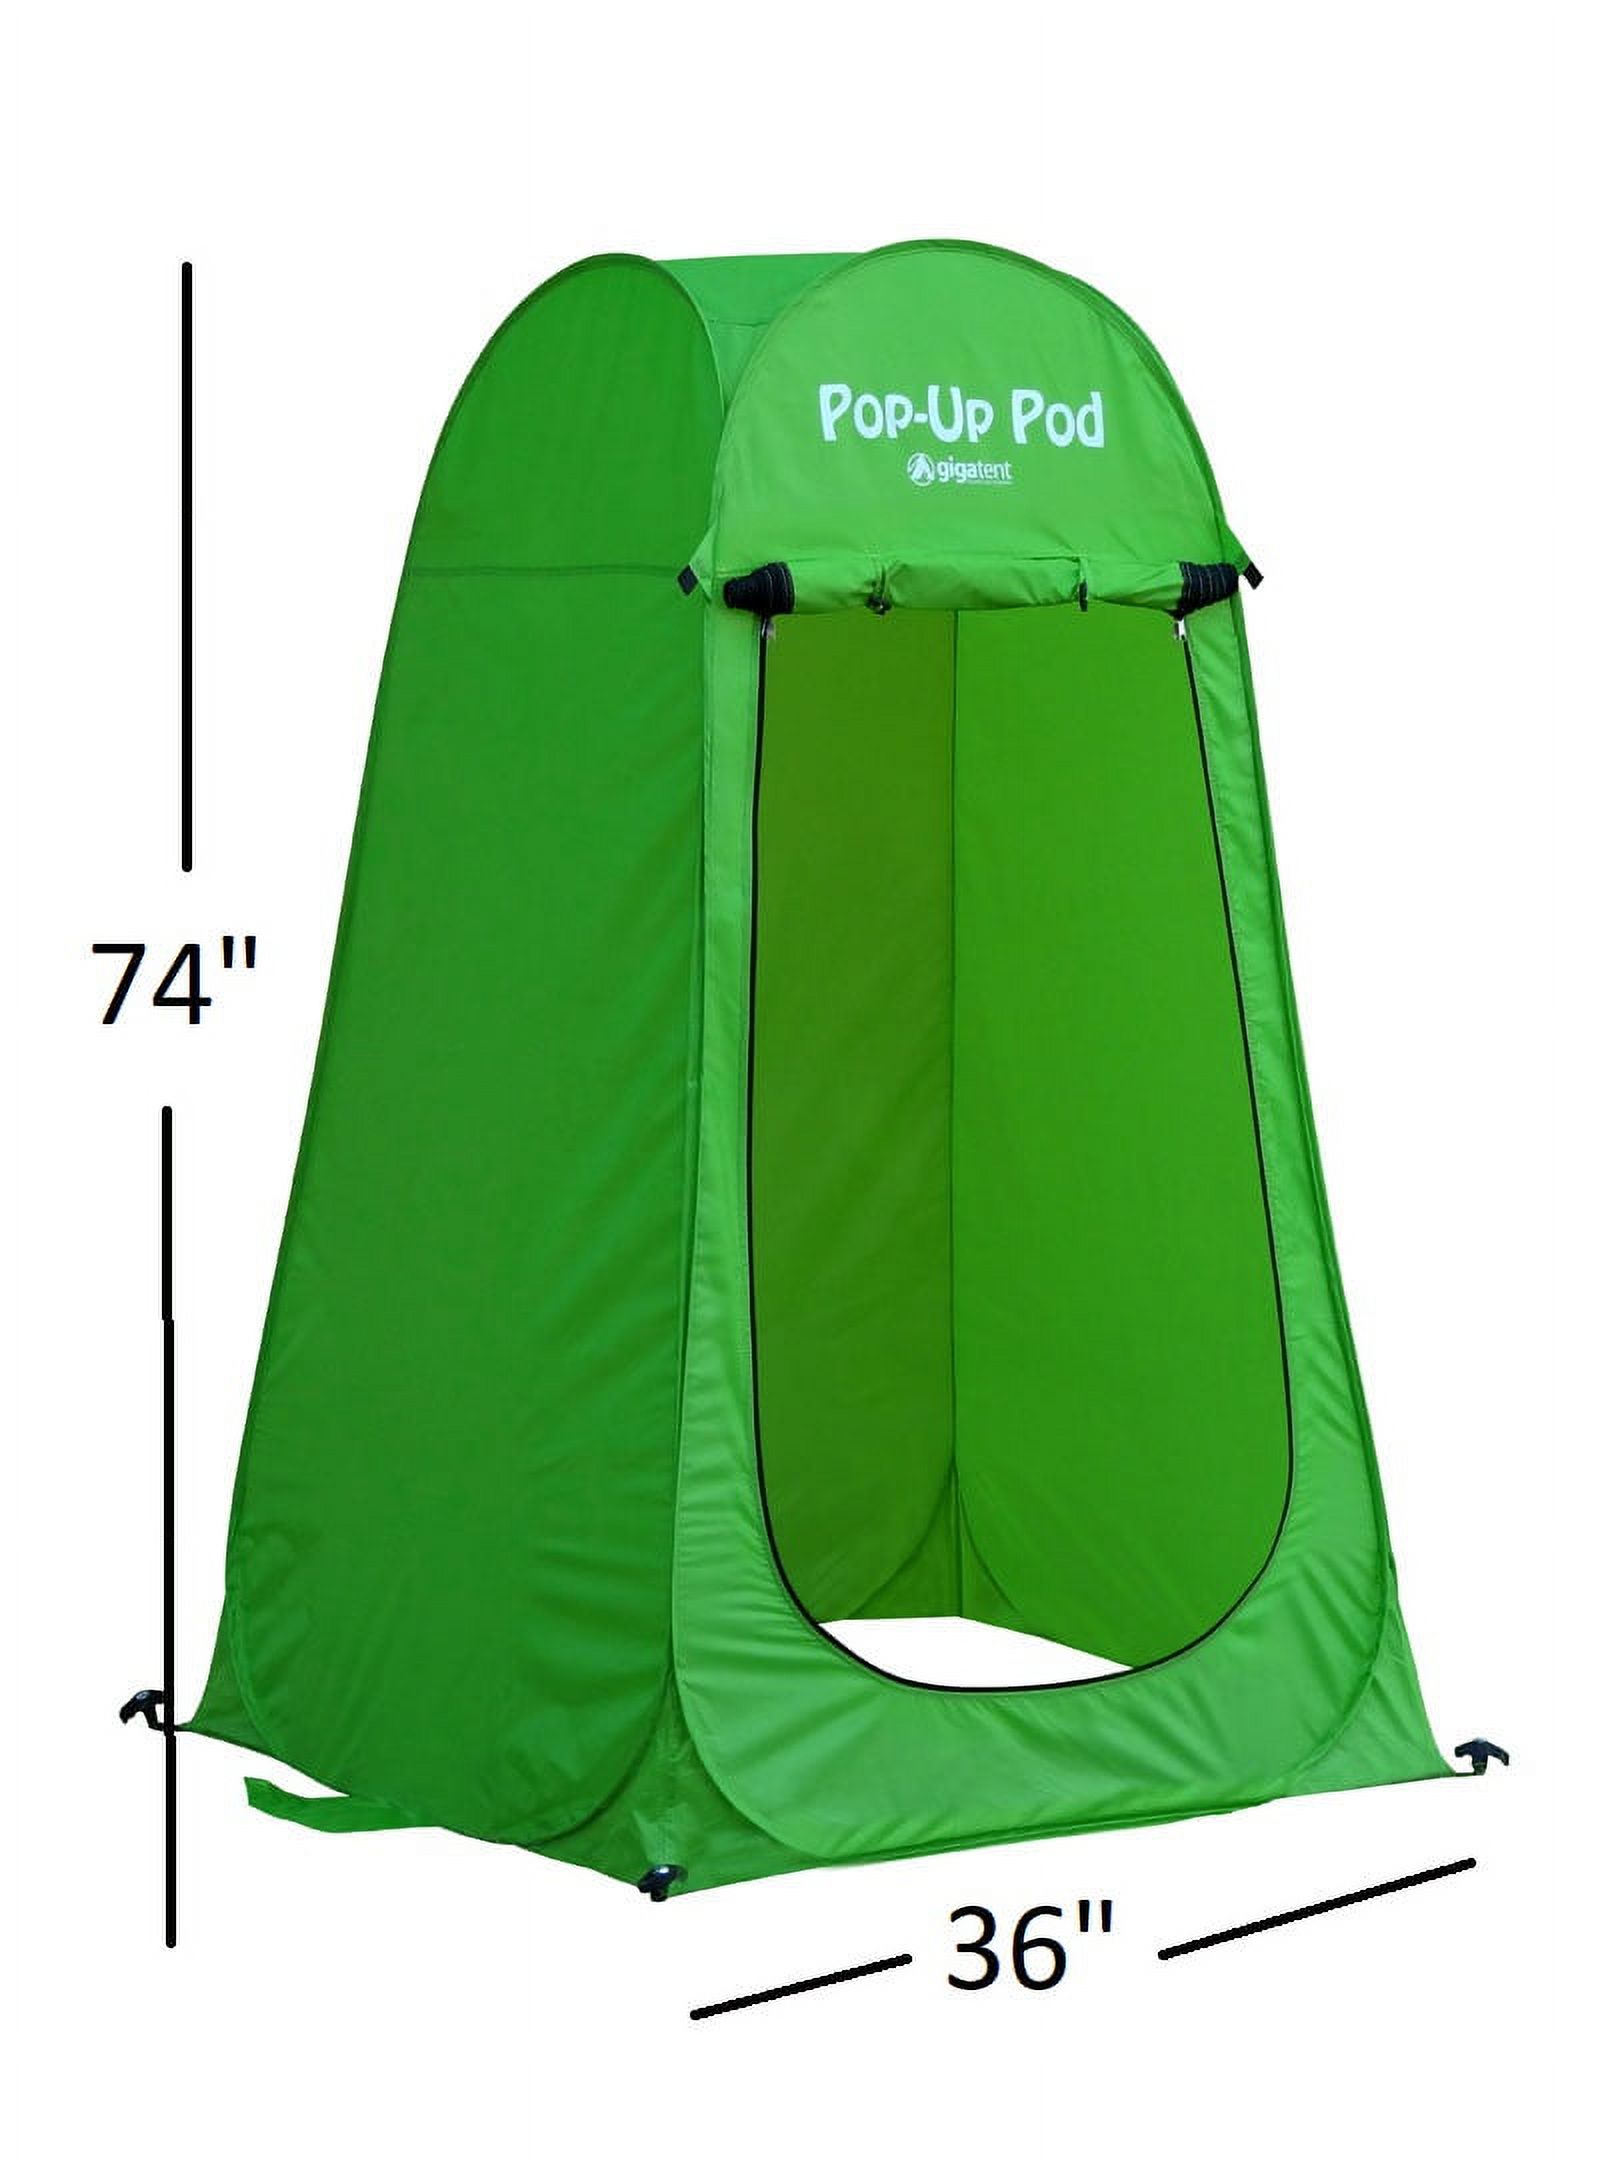 GigaTent 1-Person Pop-up Privacy Tent for Camping Changing Room, 36" x 36" x74" (H) Portable Shower Station (Green) - image 3 of 11